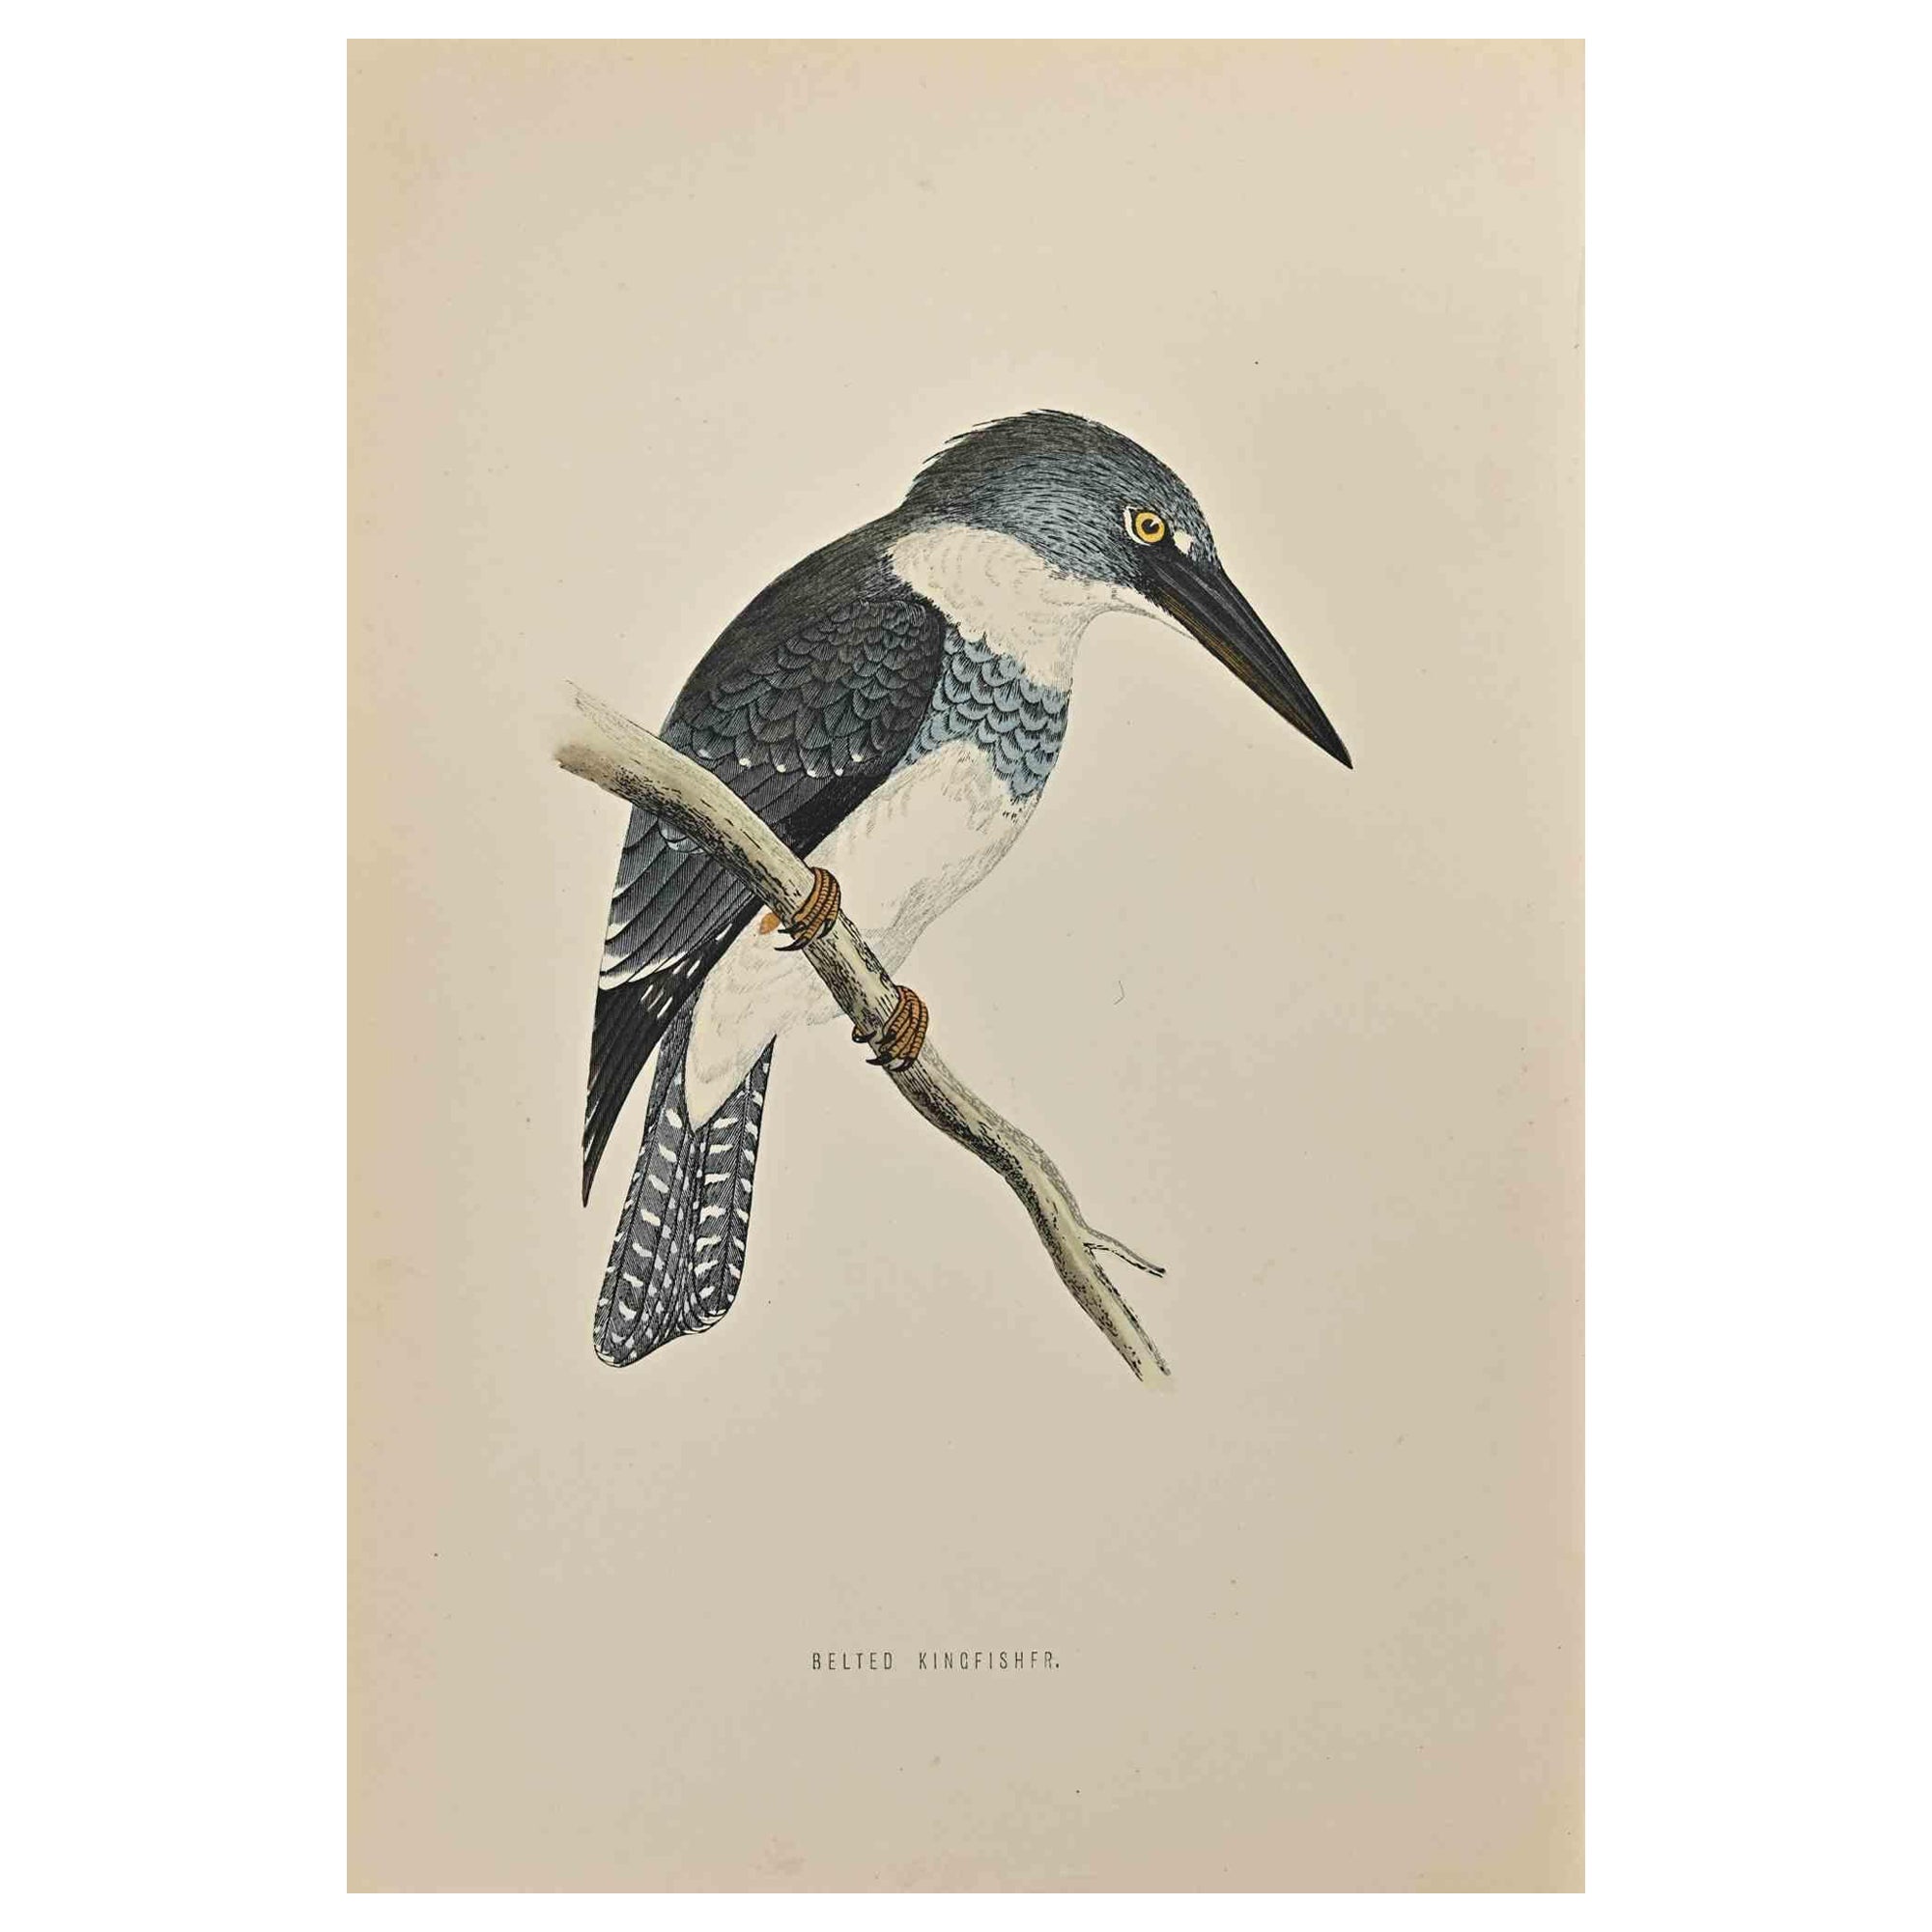 Belted Kingfishfr is a modern artwork realized in 1870 by the British artist Alexander Francis Lydon (1836-1917) . 

Woodcut print, hand colored, published by London, Bell & Sons, 1870.  Name of the bird printed in plate. This work is part of a